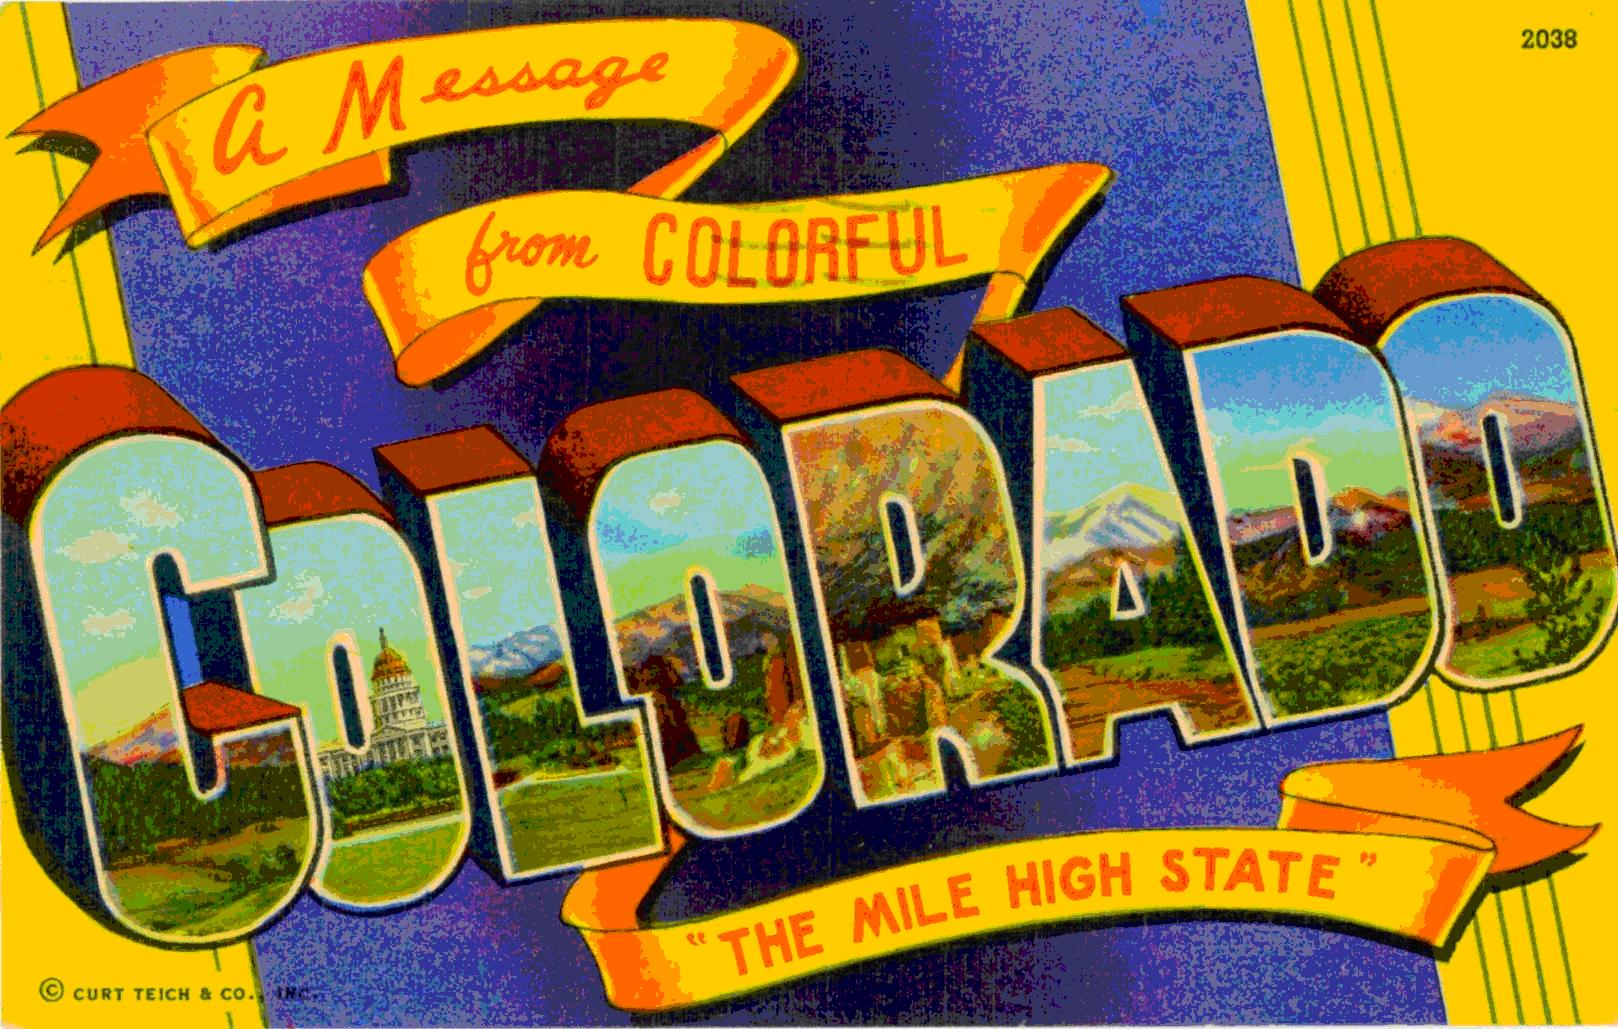 Archive: The 2008 Campaign, Part I: Colorado Swings